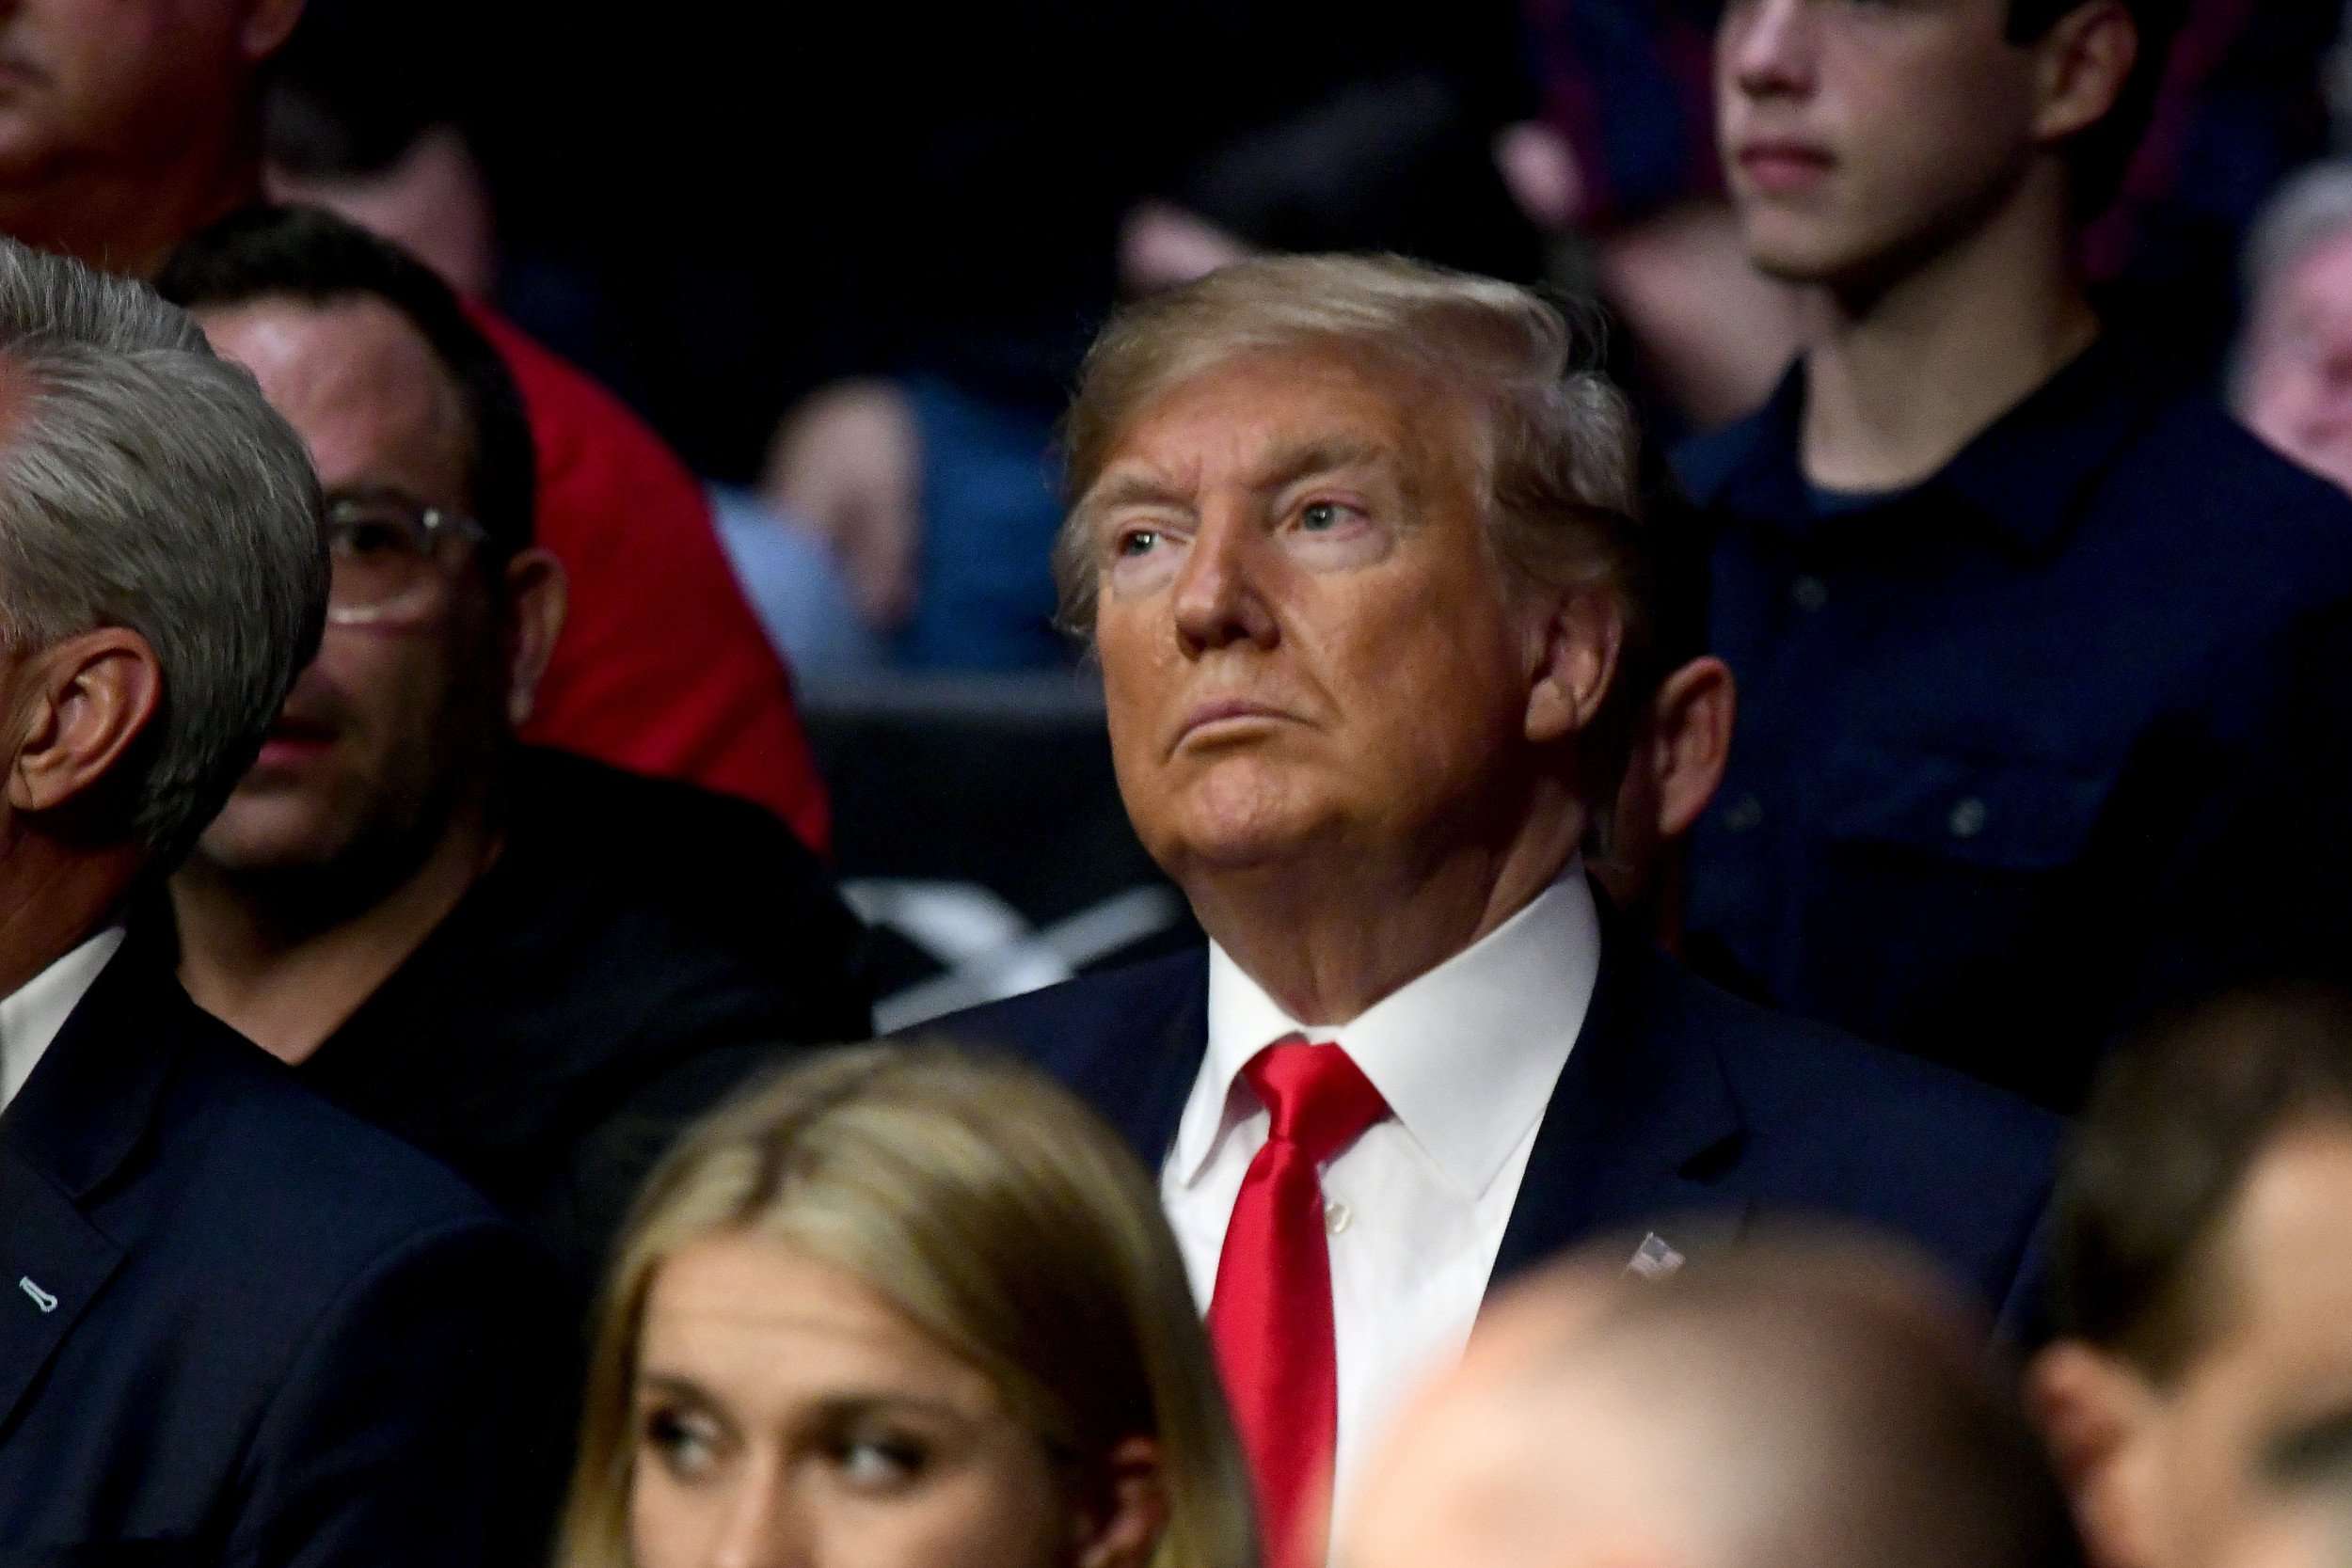 image for Trump Being Booed at UFC 244 Event a Surprise, Says Political Scientist: 'This Should Be His Crowd'